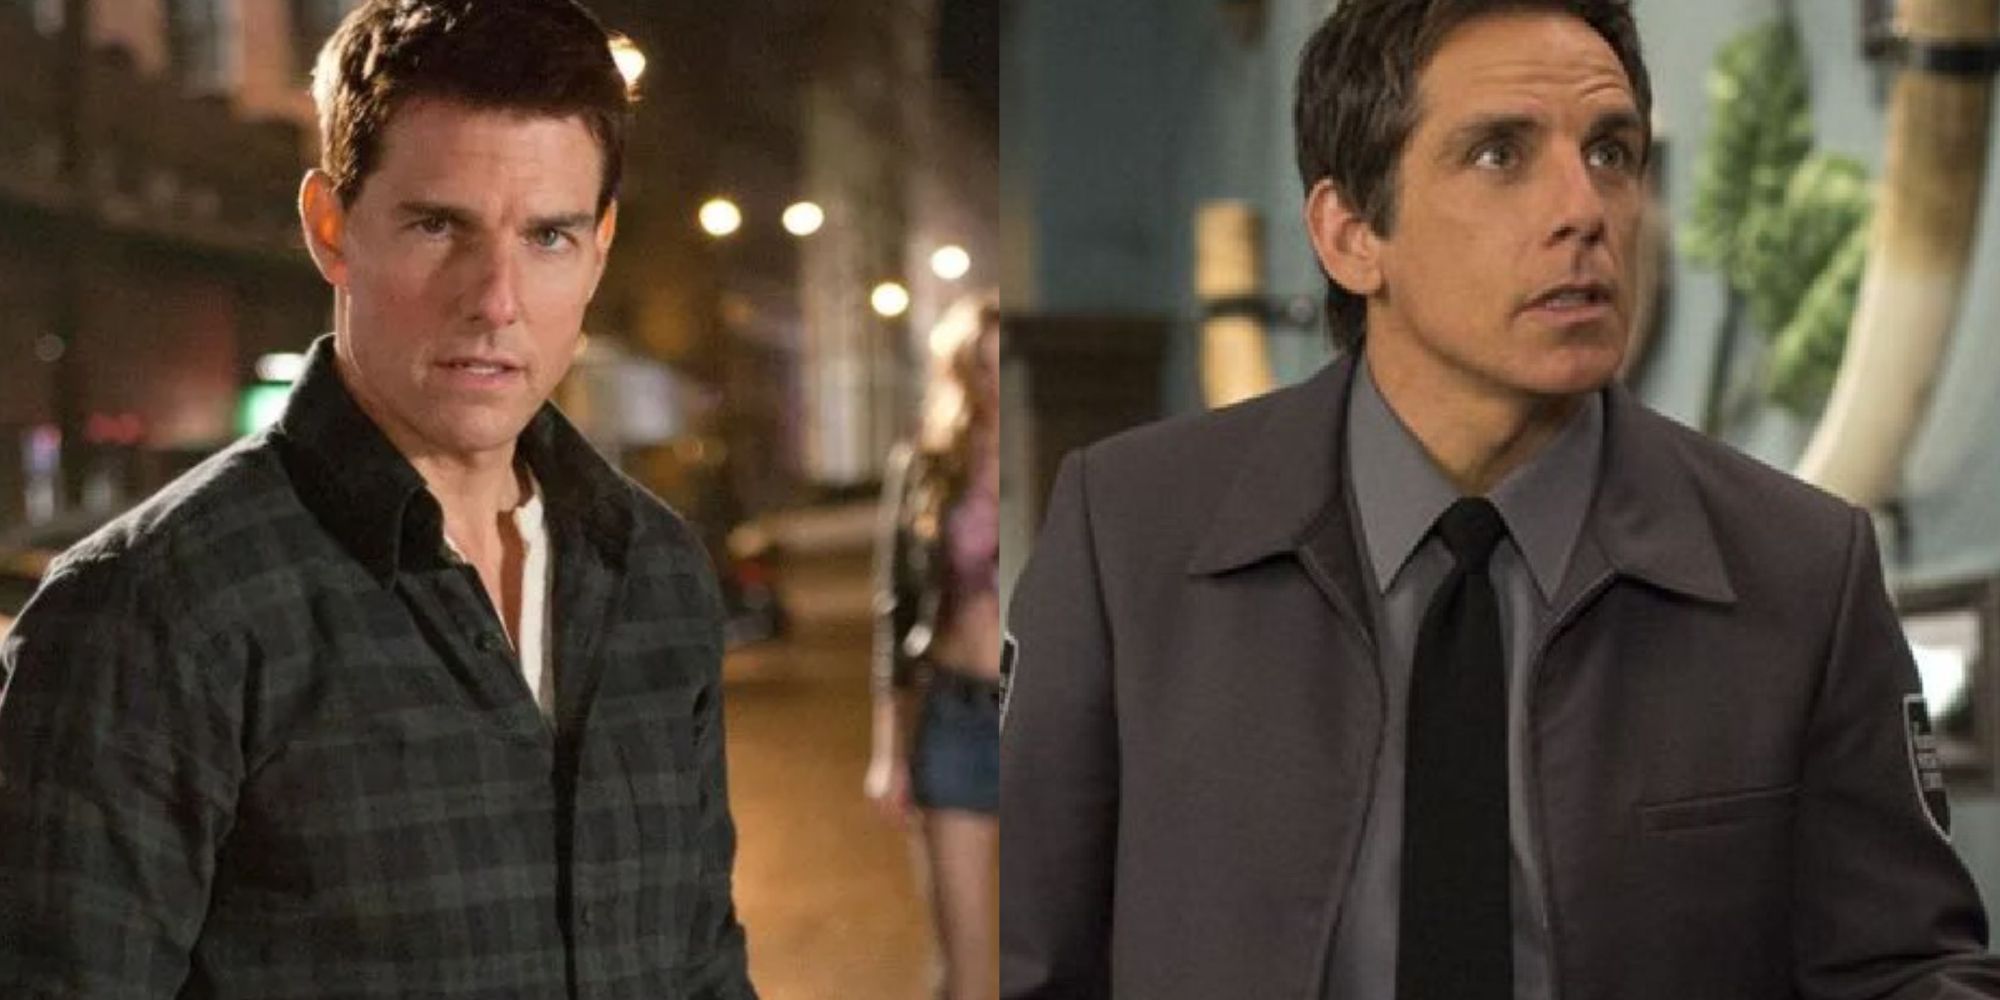 Tom Cruise in Jack Reacher and Ben Stiller in Night at the Museum